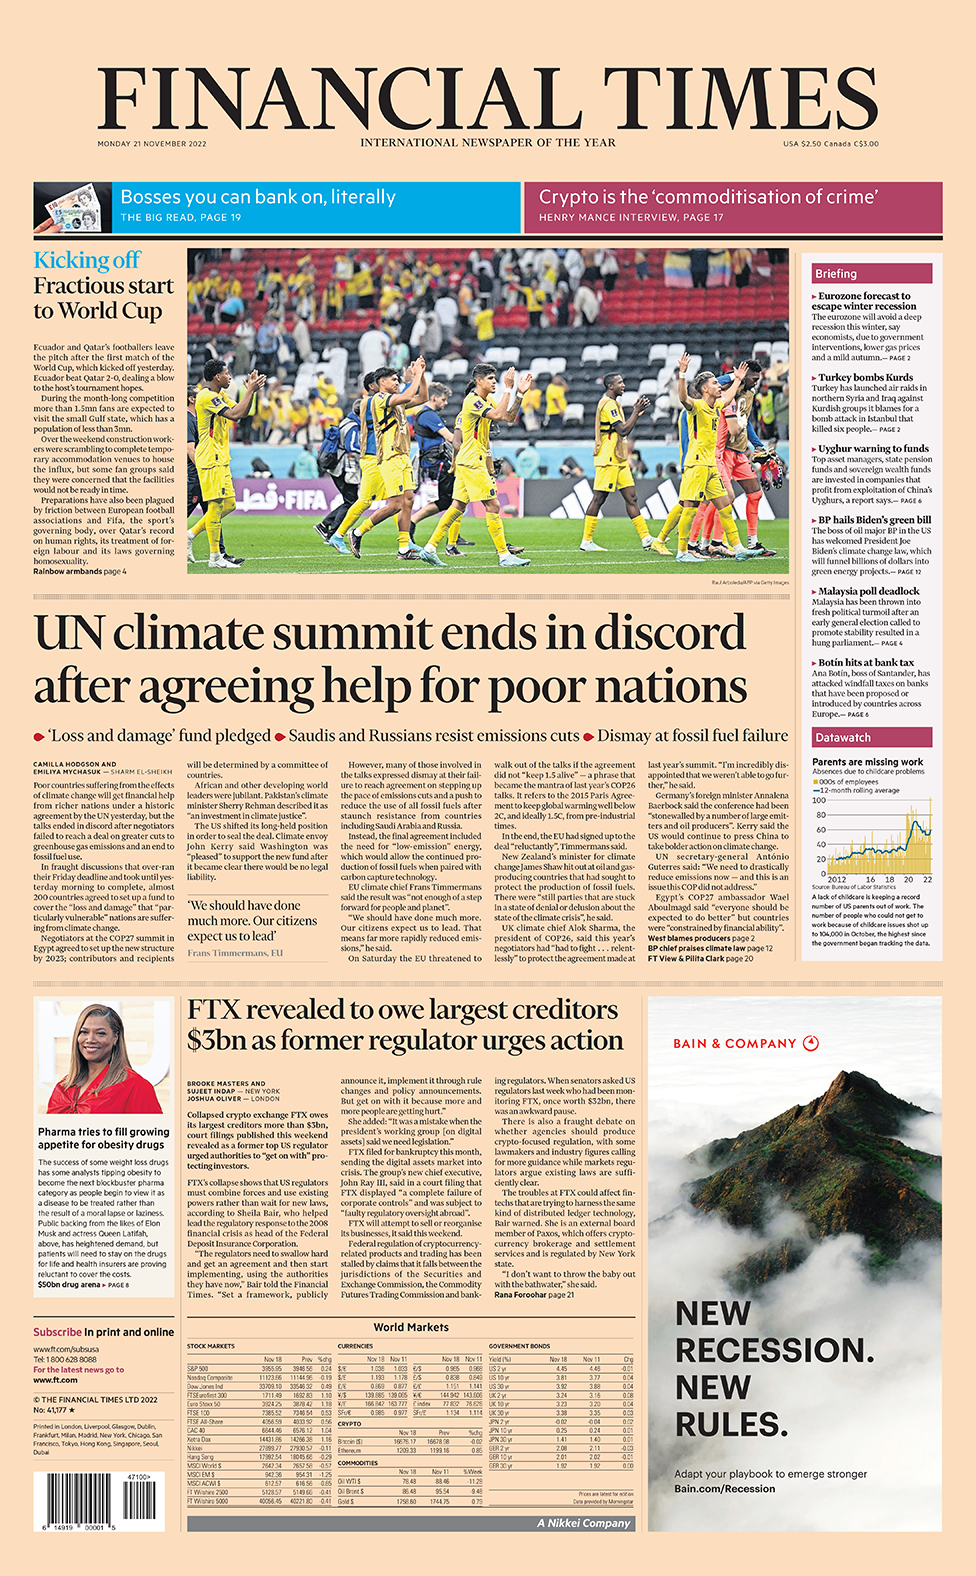 The Financial Times front page